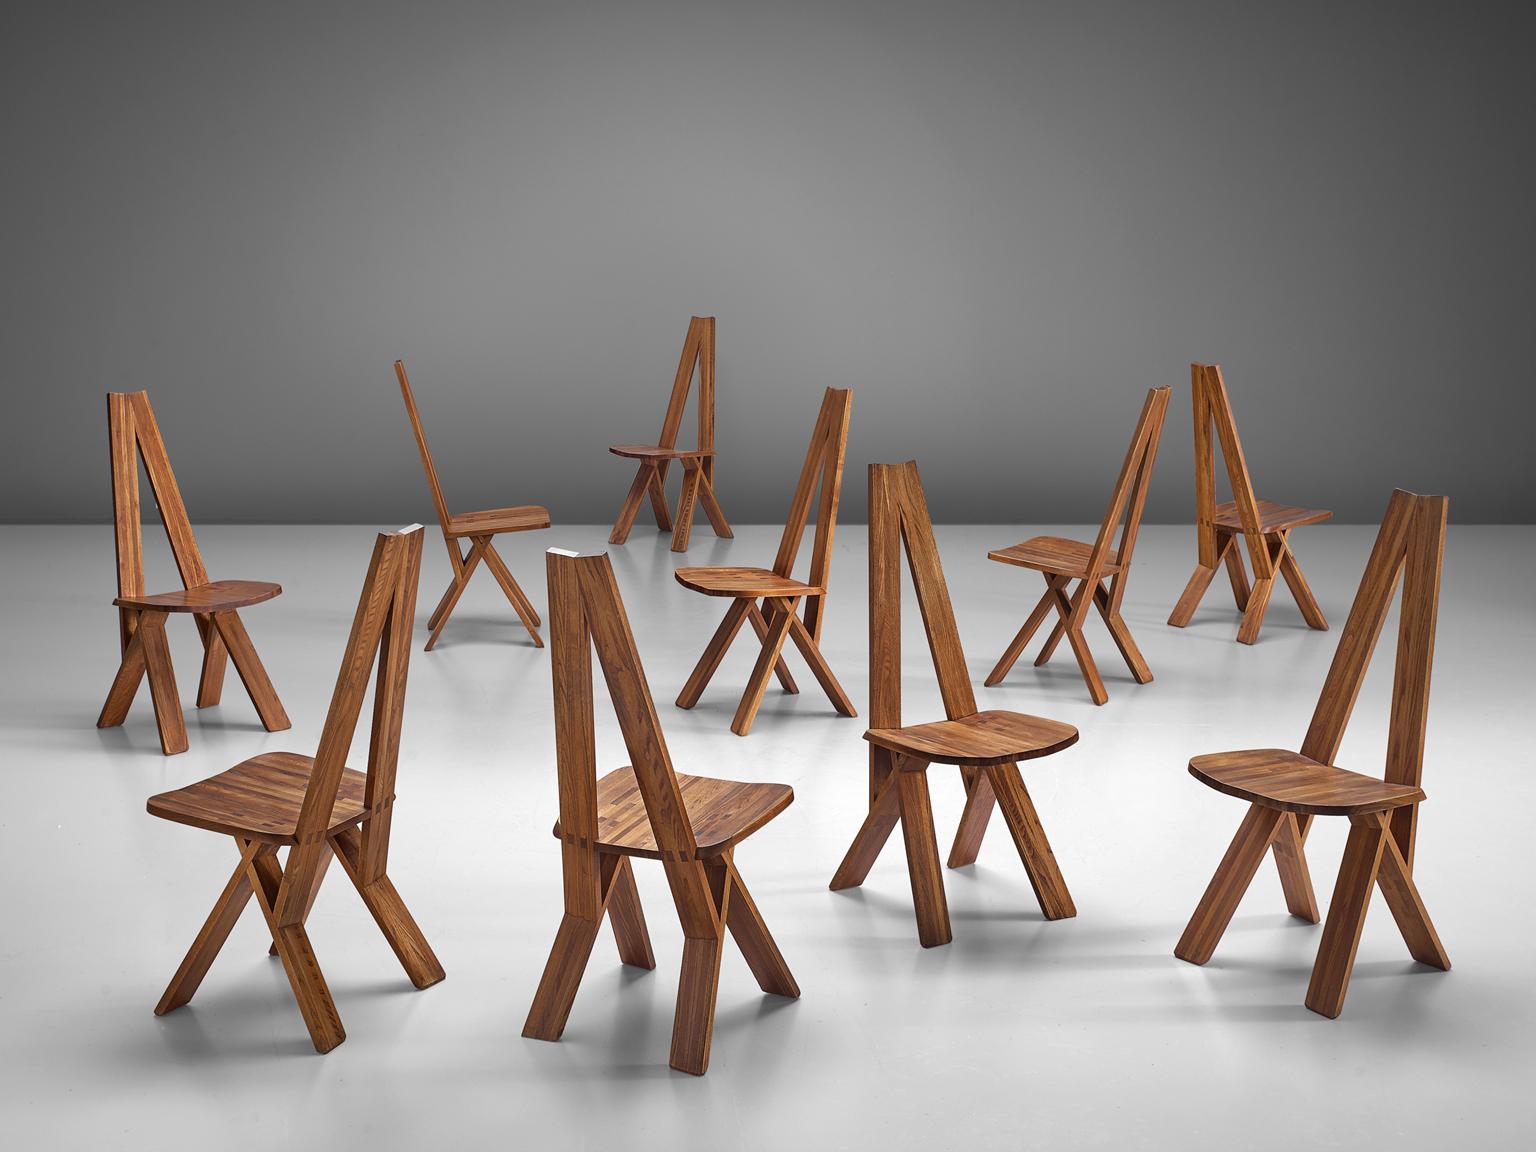 Set of ten 'Chlacc' chairs, in elm, by Pierre Chapo, France, circa 1979.

This set of ten 'Chlacc' dining chairs, model S45, are executed in solid elmwood. Designed by Pierre Chapo. These extraordinary chairs are in excellent condition, showing an